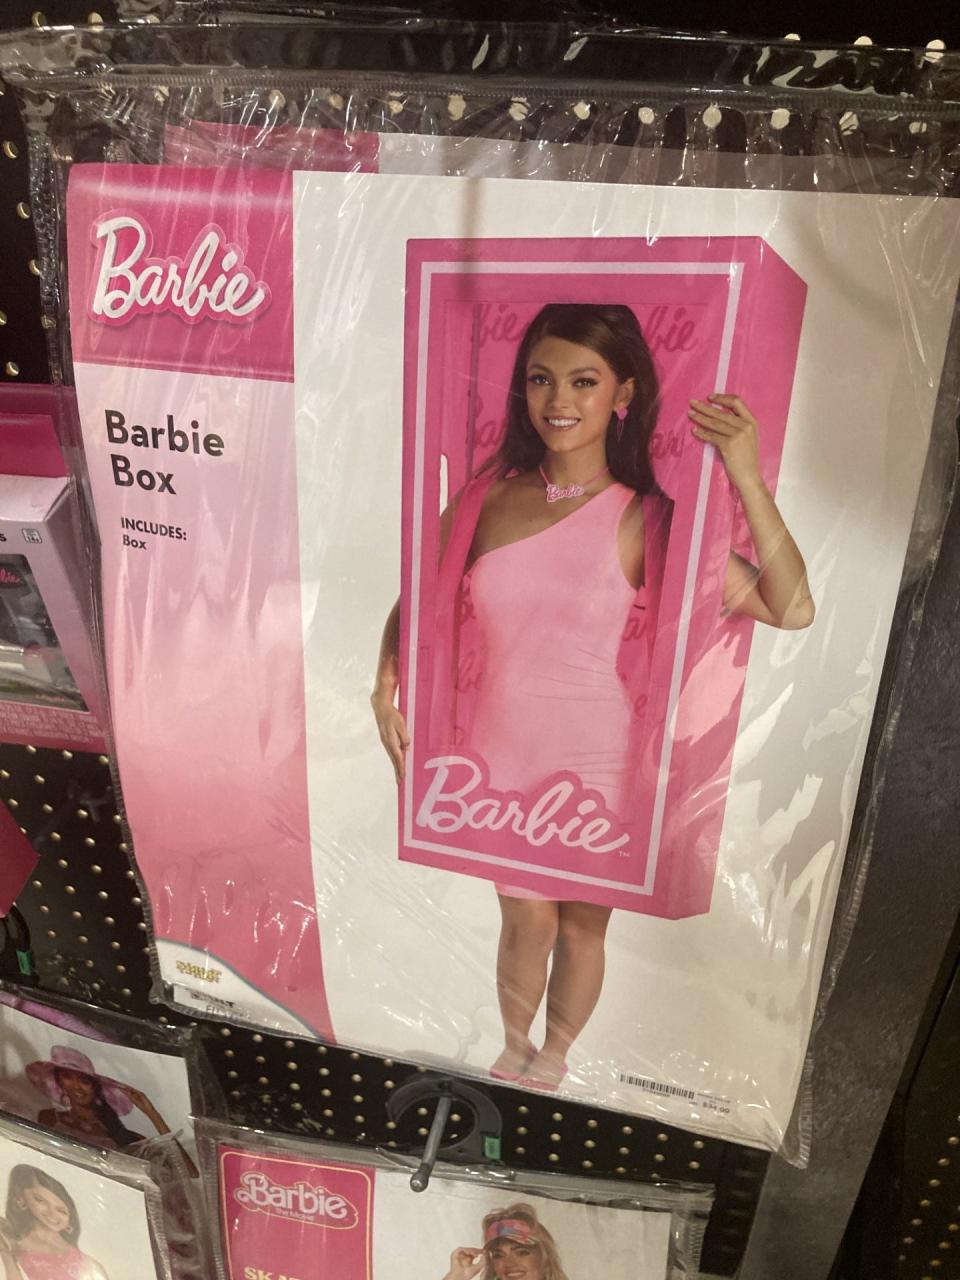 Want to dress as Barbie this Halloween 2023? There are plenty of options including the Barbie doll box.